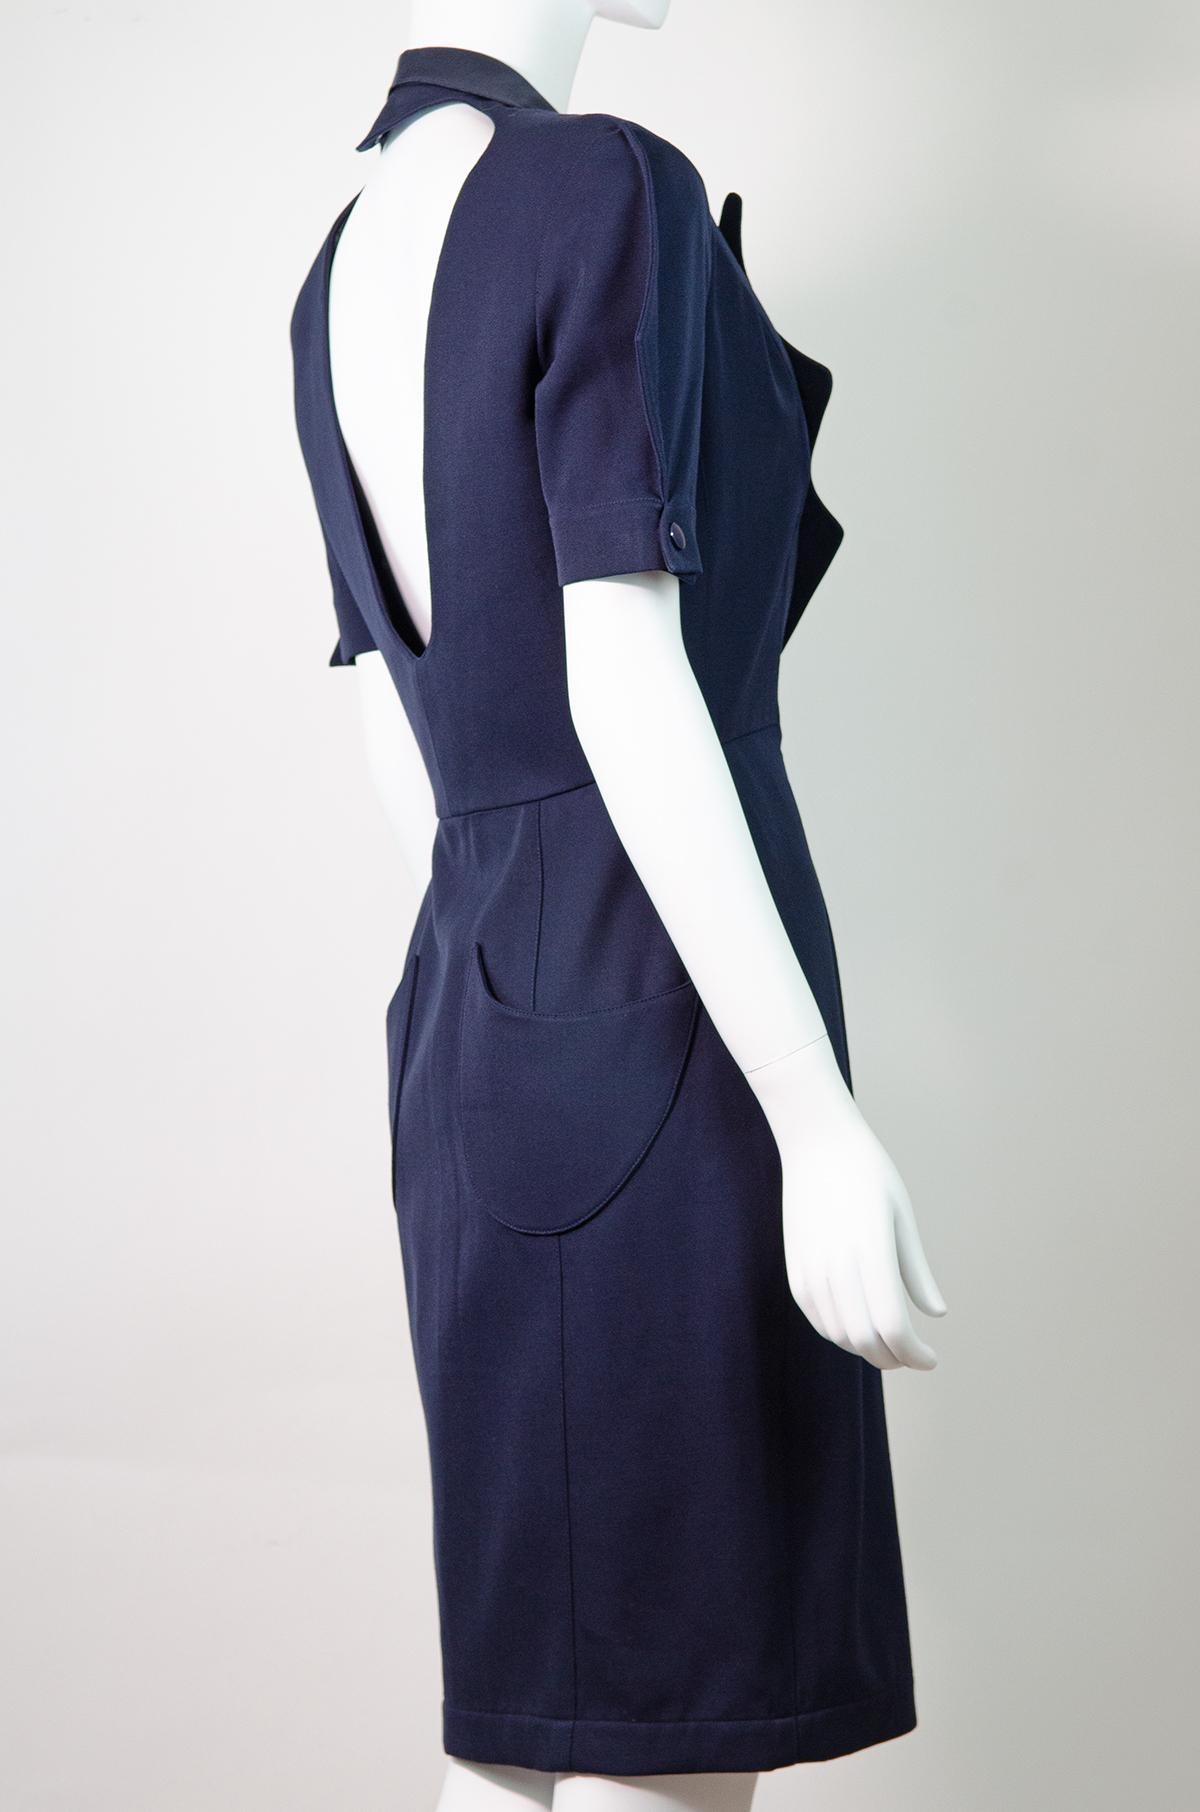 THIERRY MUGLER Vintage 1980s Dramatic Open Back Dress  1